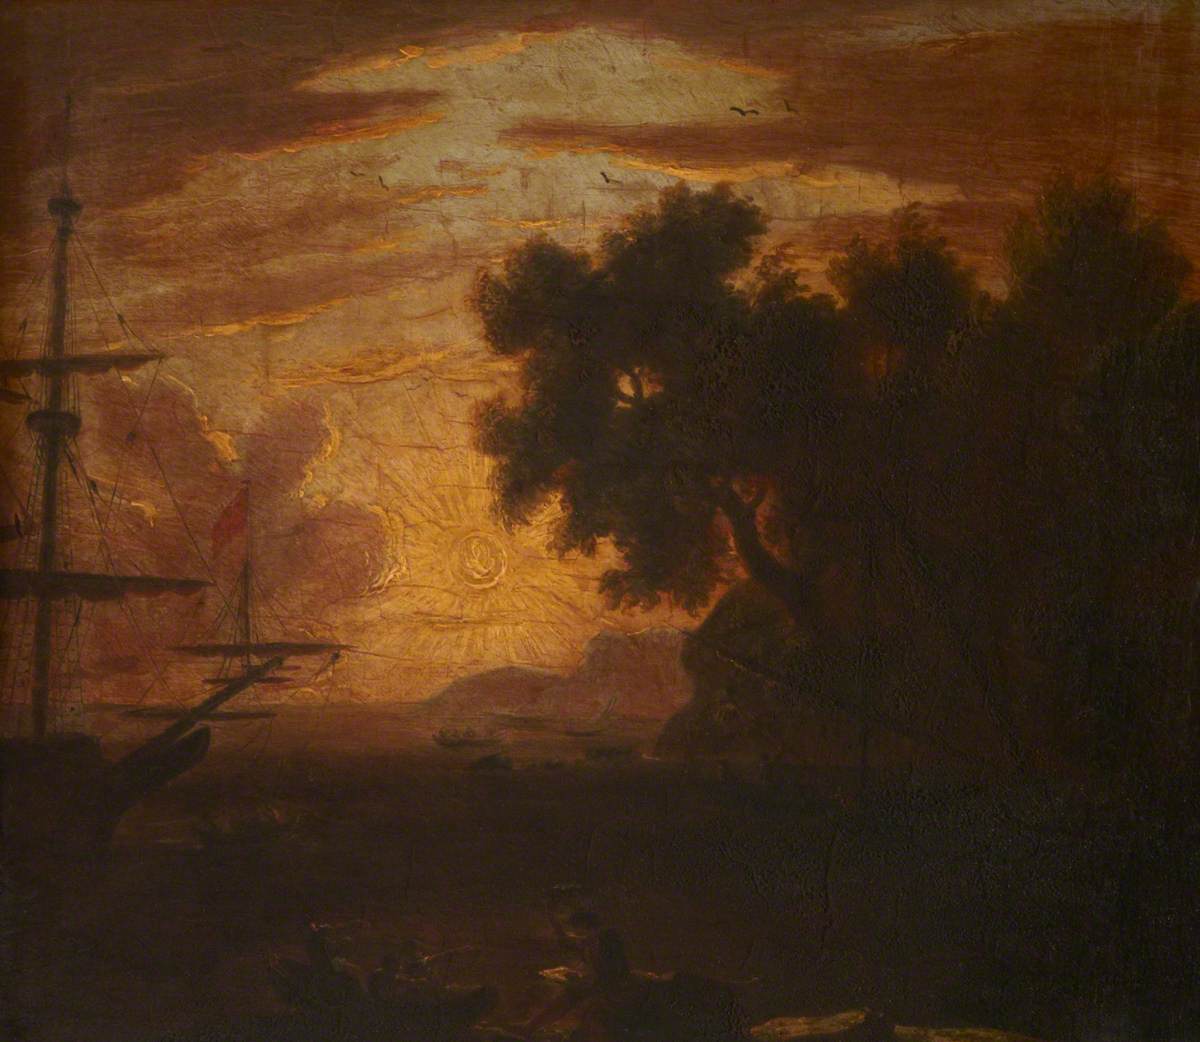 A Sunset Coastal Scene with an Anchored Frigate and Figures in a Longboat